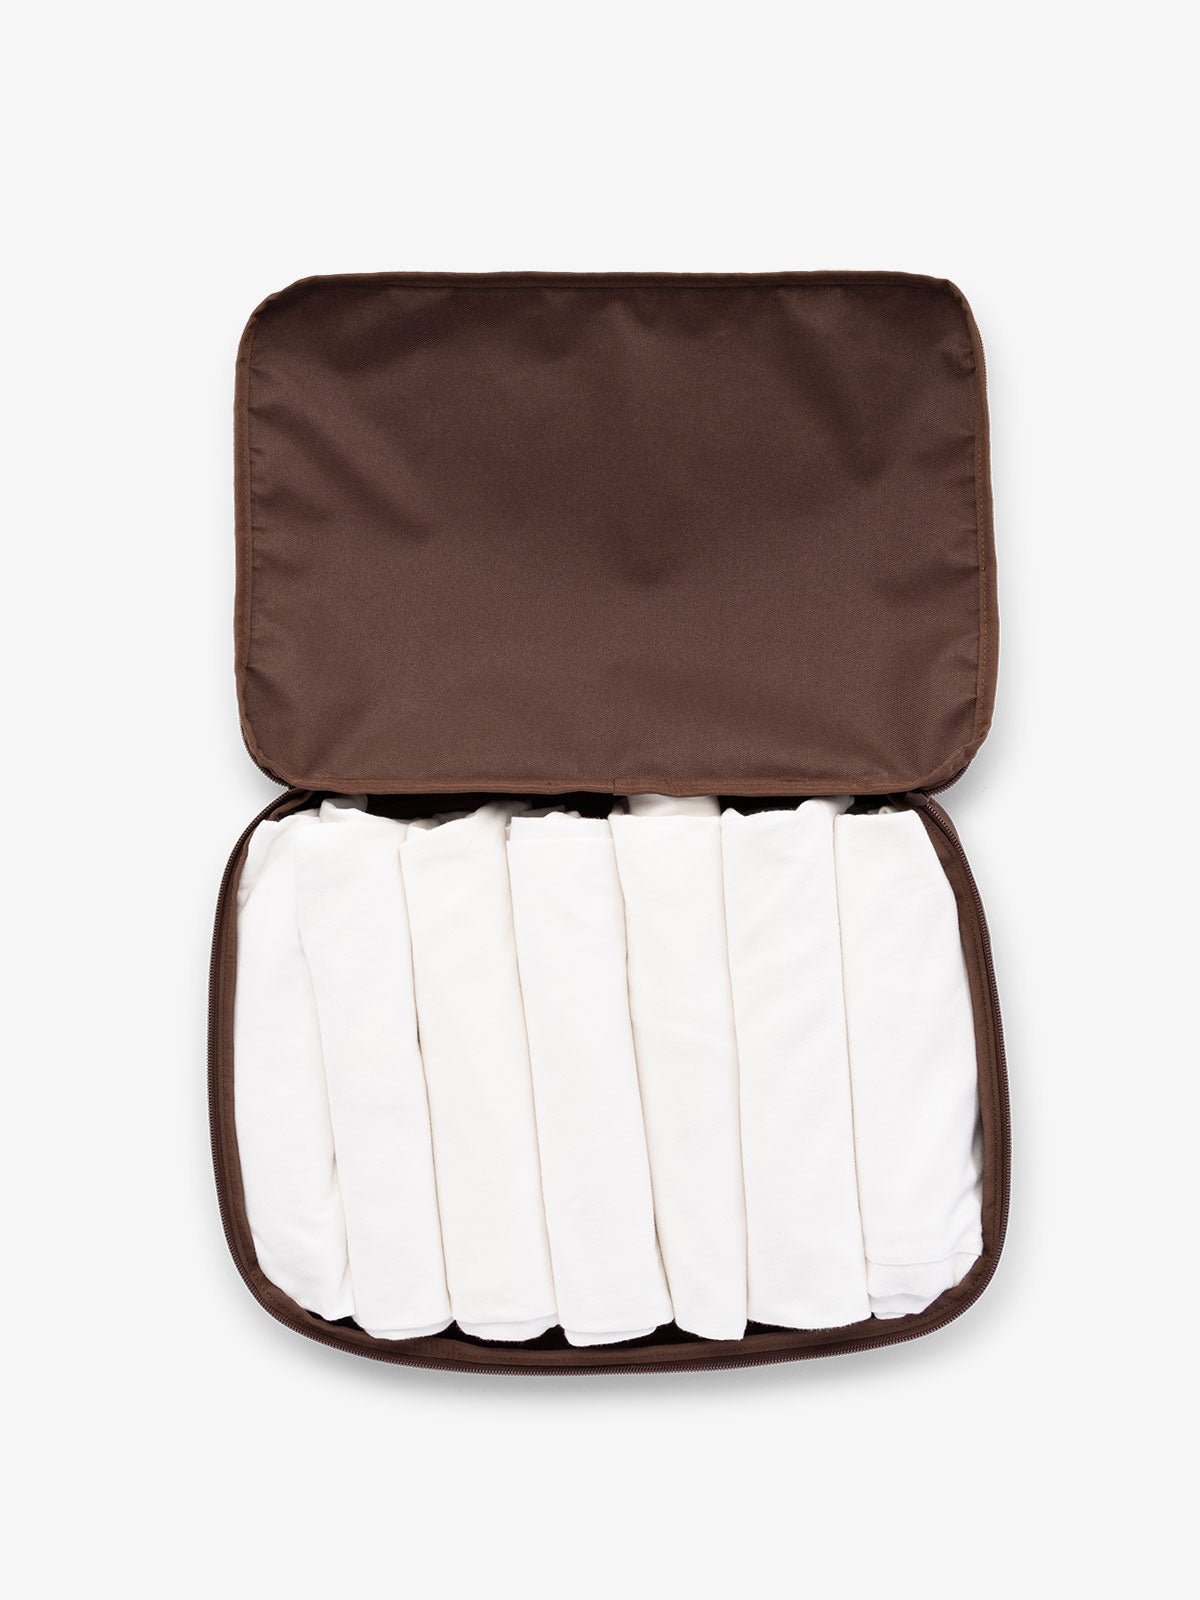 CALPAK Large Compression Packing cubes for travel made with durable materials in dark brown